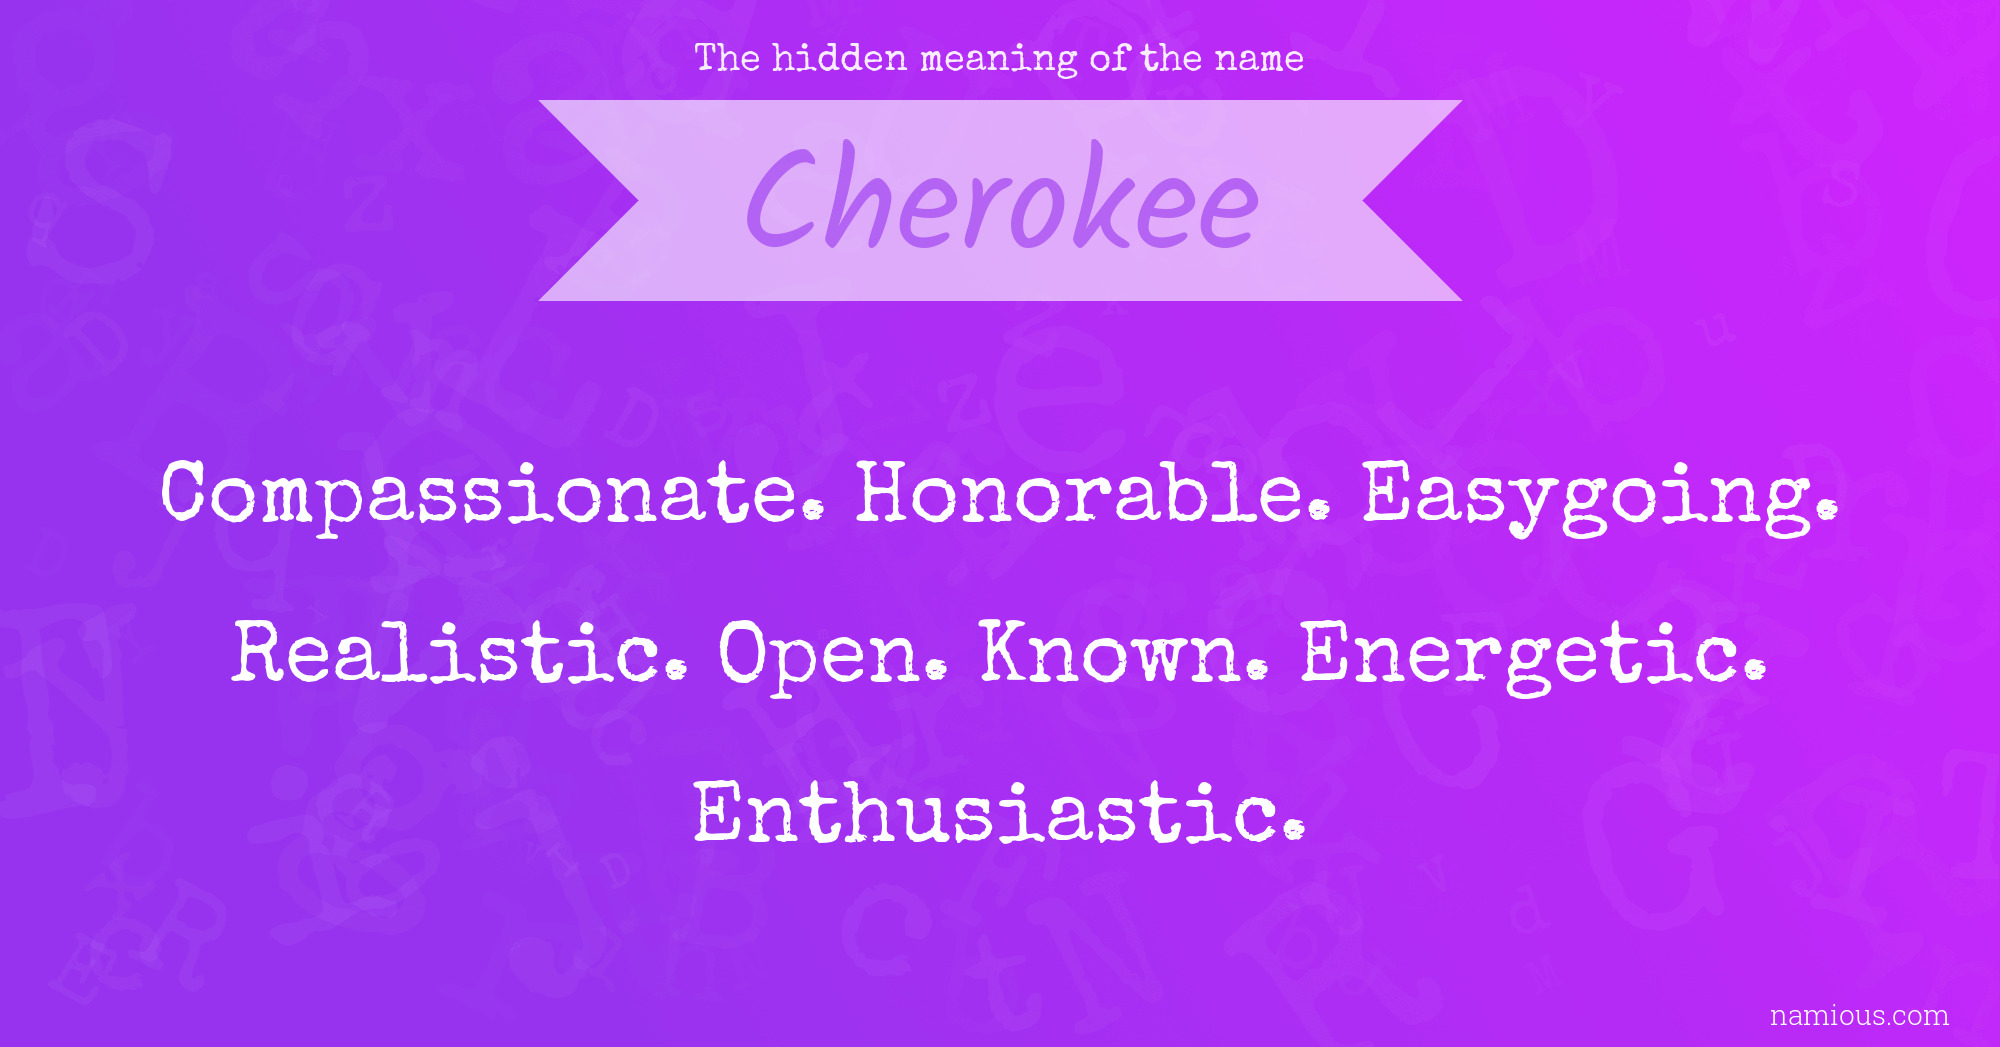 The hidden meaning of the name Cherokee